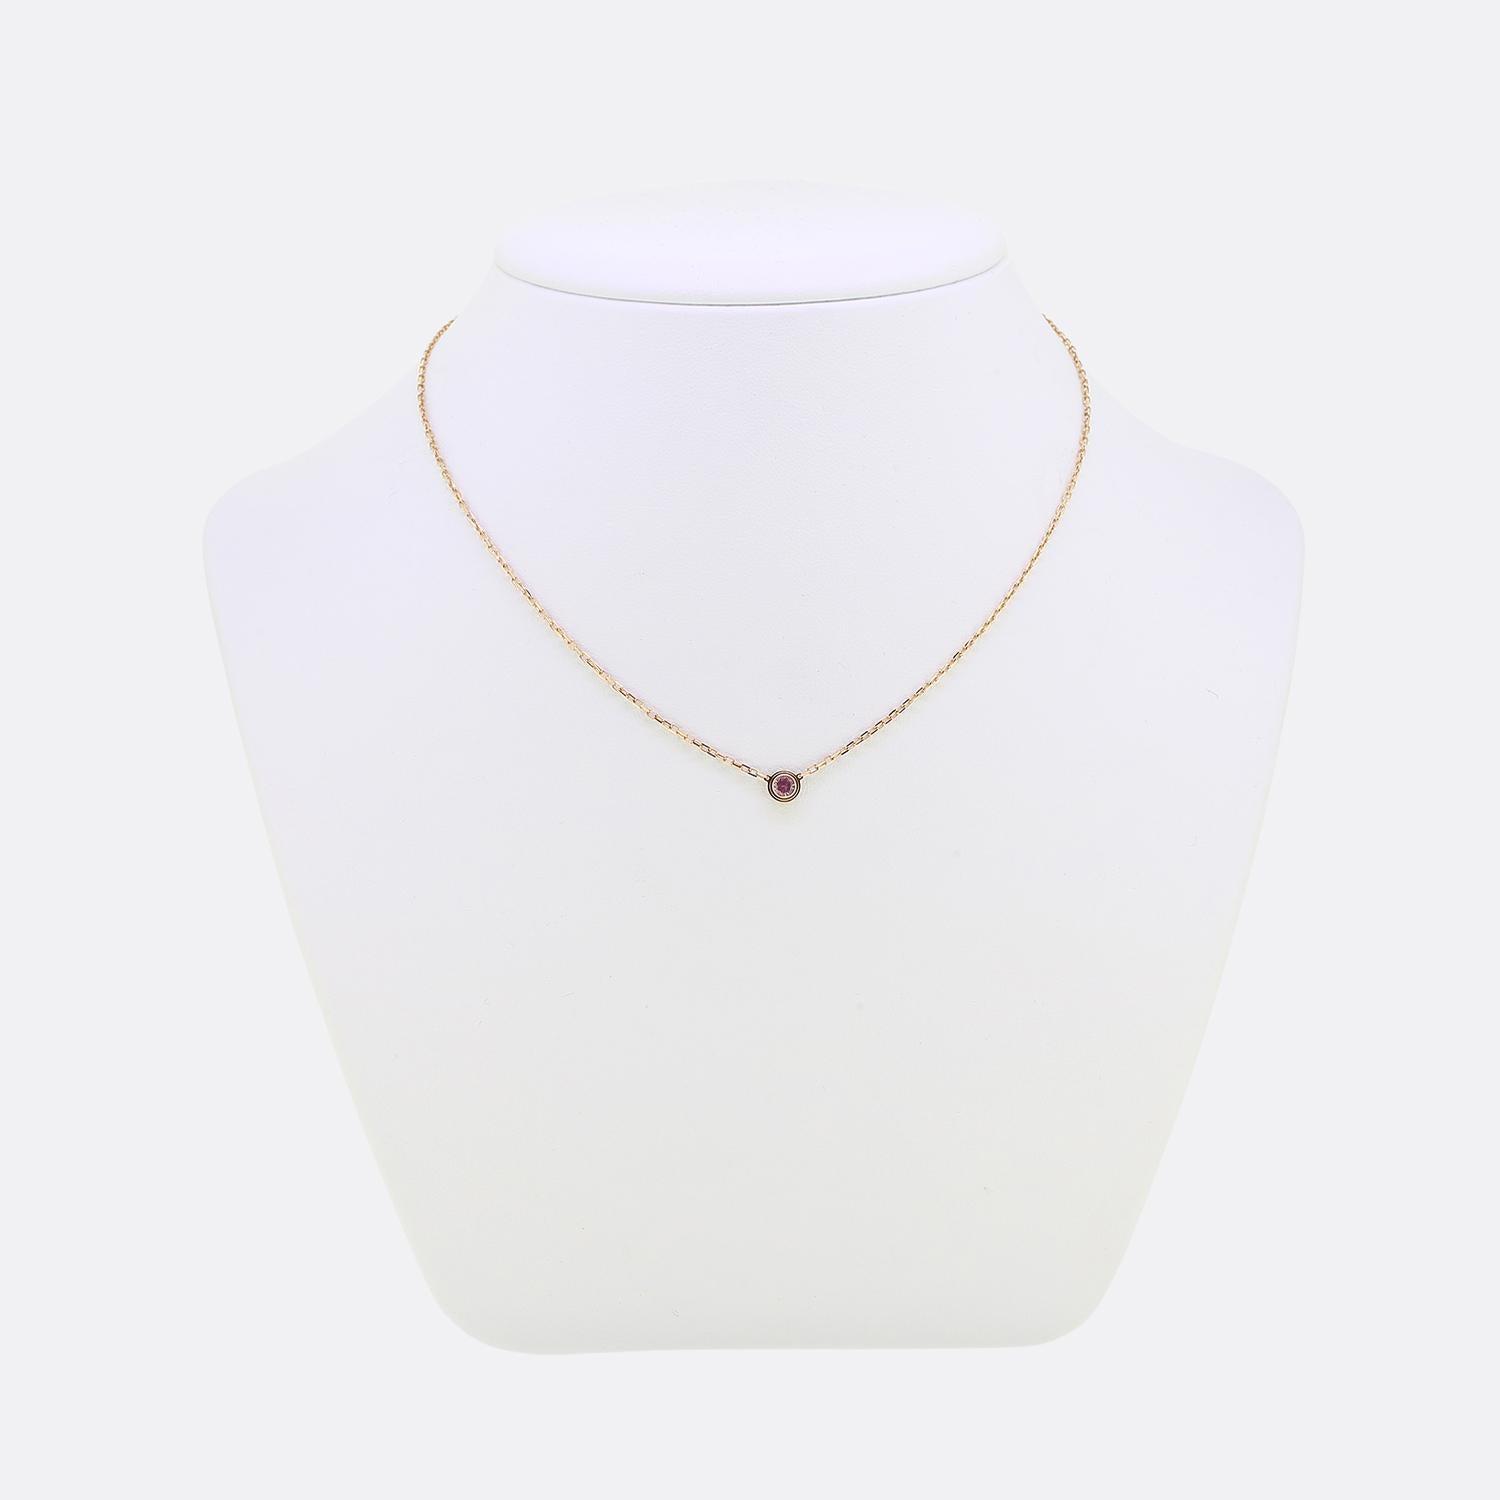 Here we have a fabulous 18ct rose gold necklace from the world renowned jewellery house of Cartier. This piece forms part of their iconic 'd'Amour' collection and features a single round faceted pink sapphire amidst a circular stepped setting. This